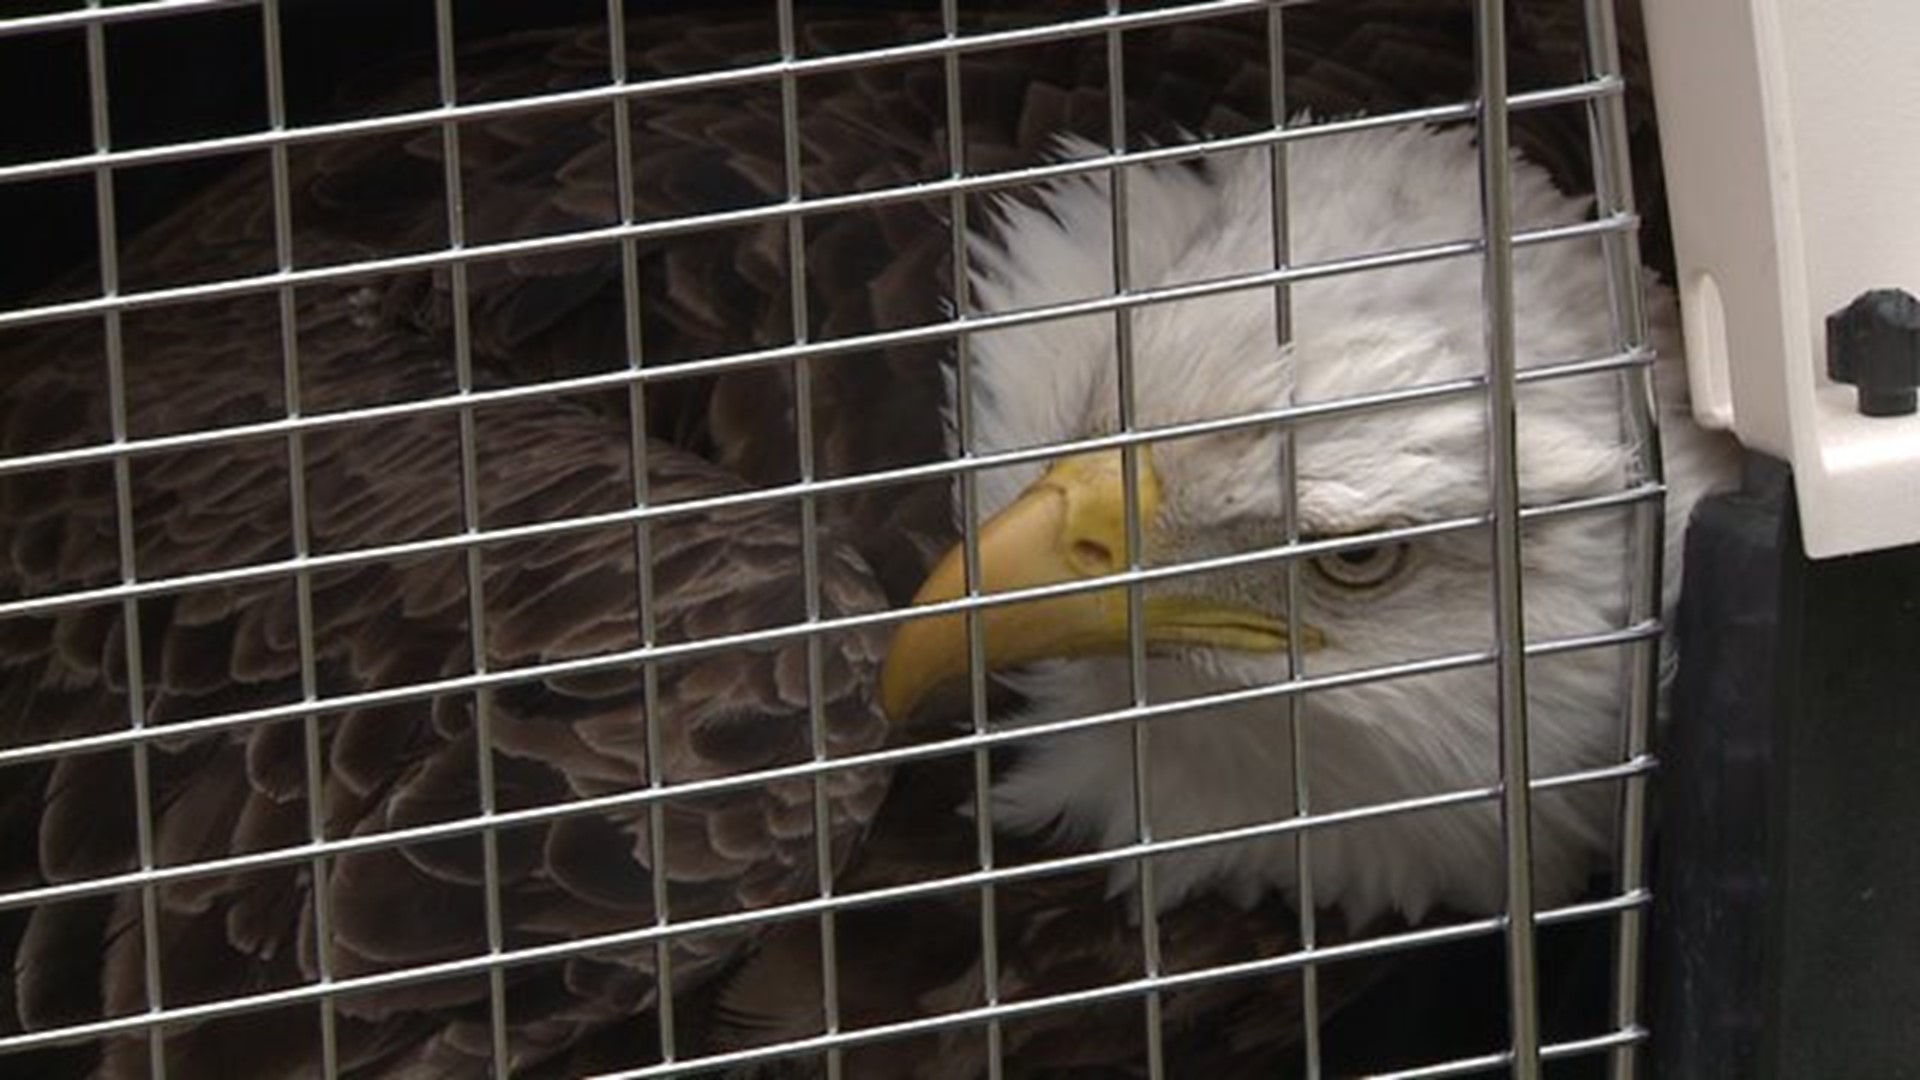 Bald eagle rescued after falling from tree in Bettendorf